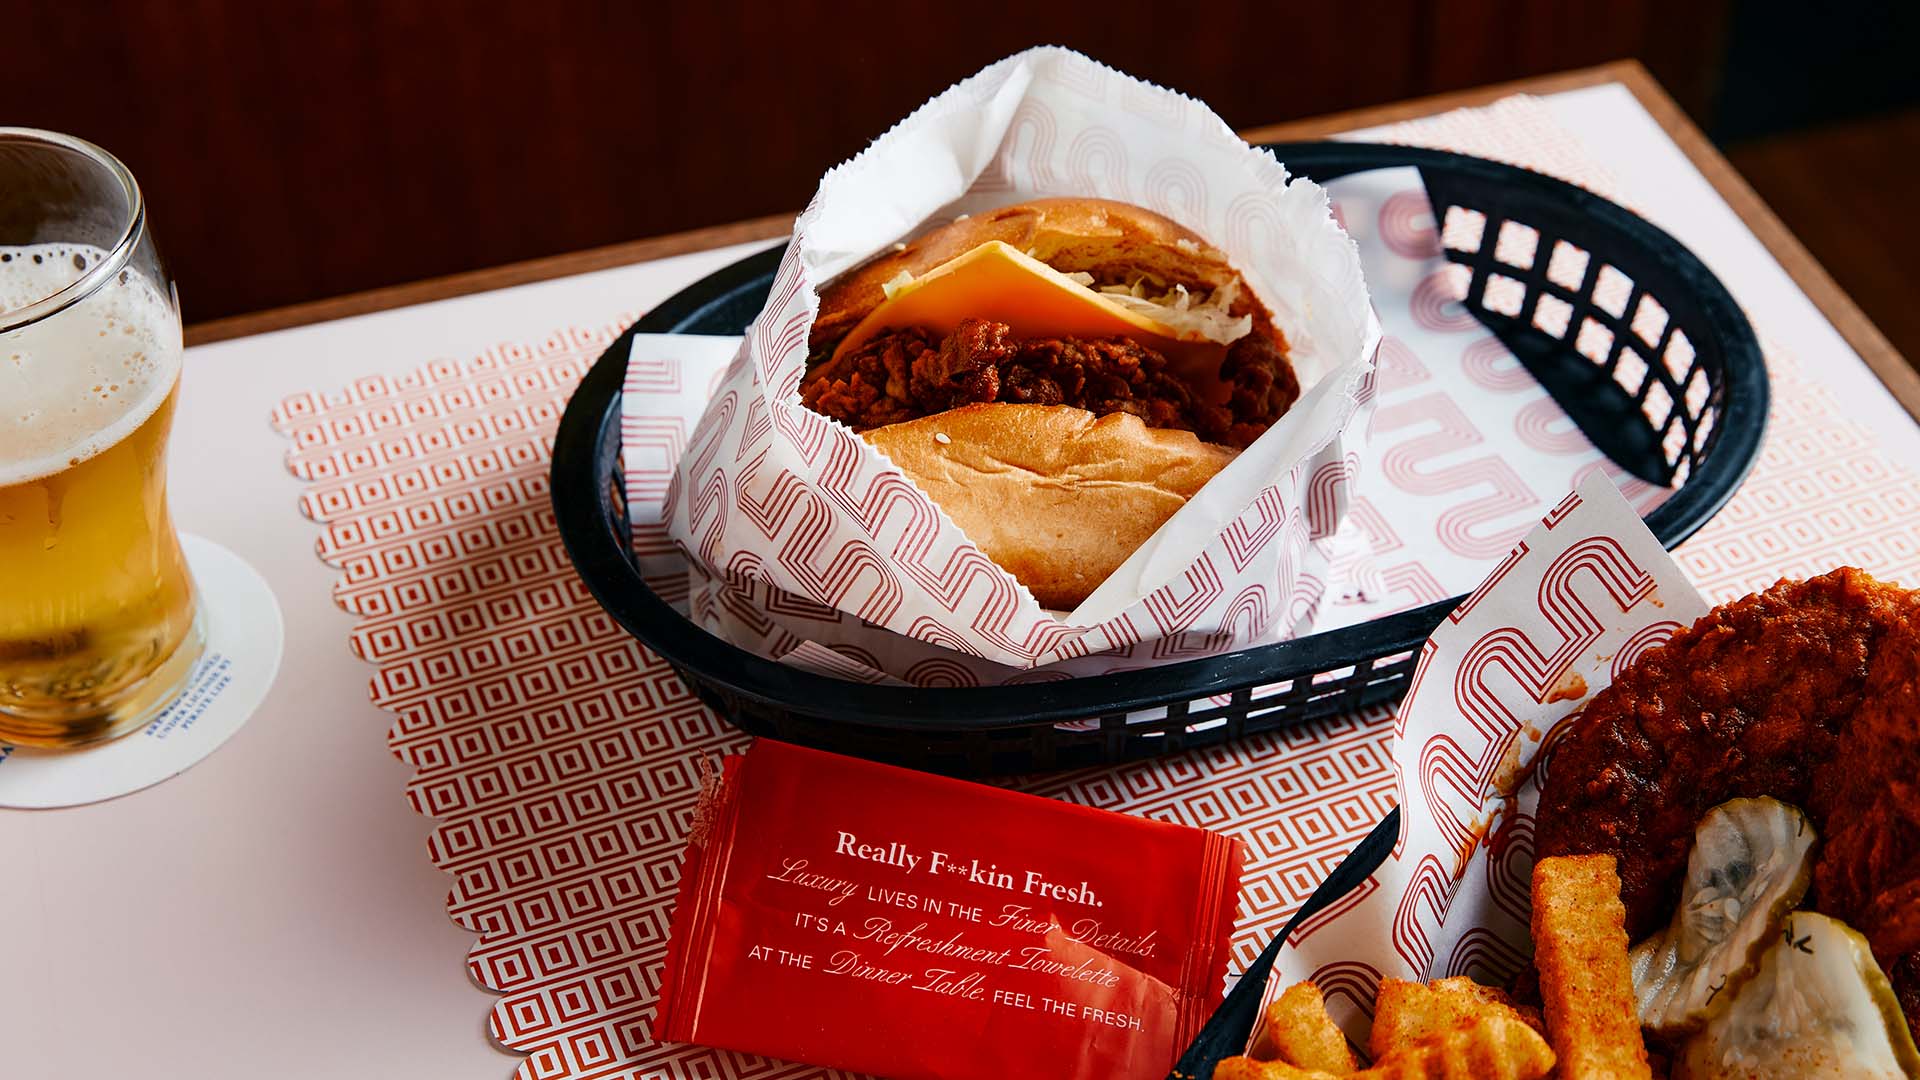 Belles Is Giving Away Spicy Chicken Sandwiches to Open Its Flagship Sydney Restaurant